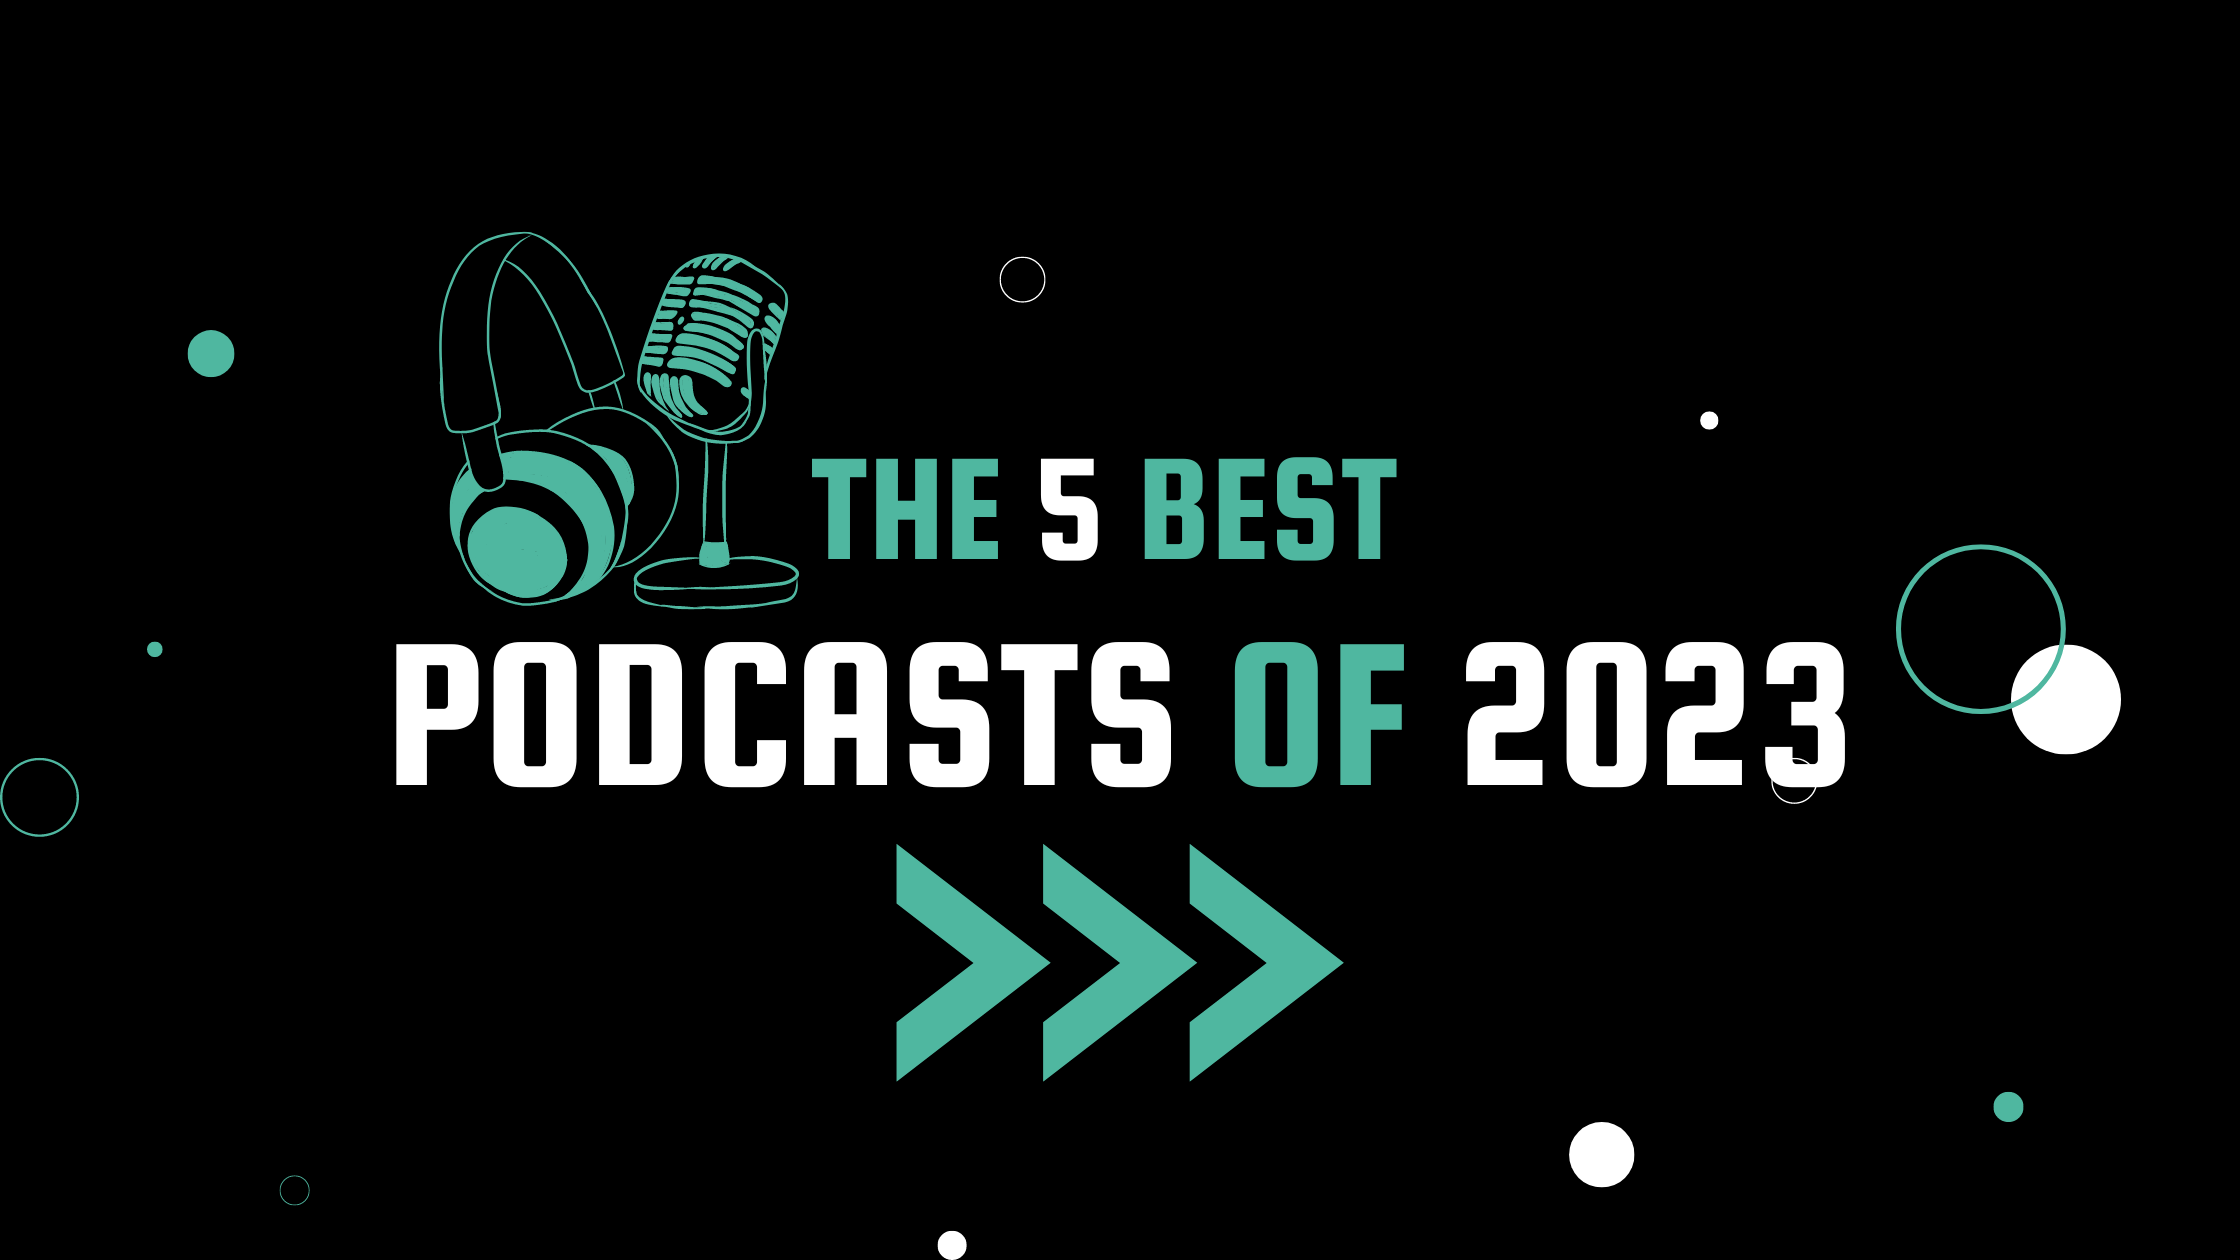 The 5 best Podcasts of 2023 That Will Keep You Listening